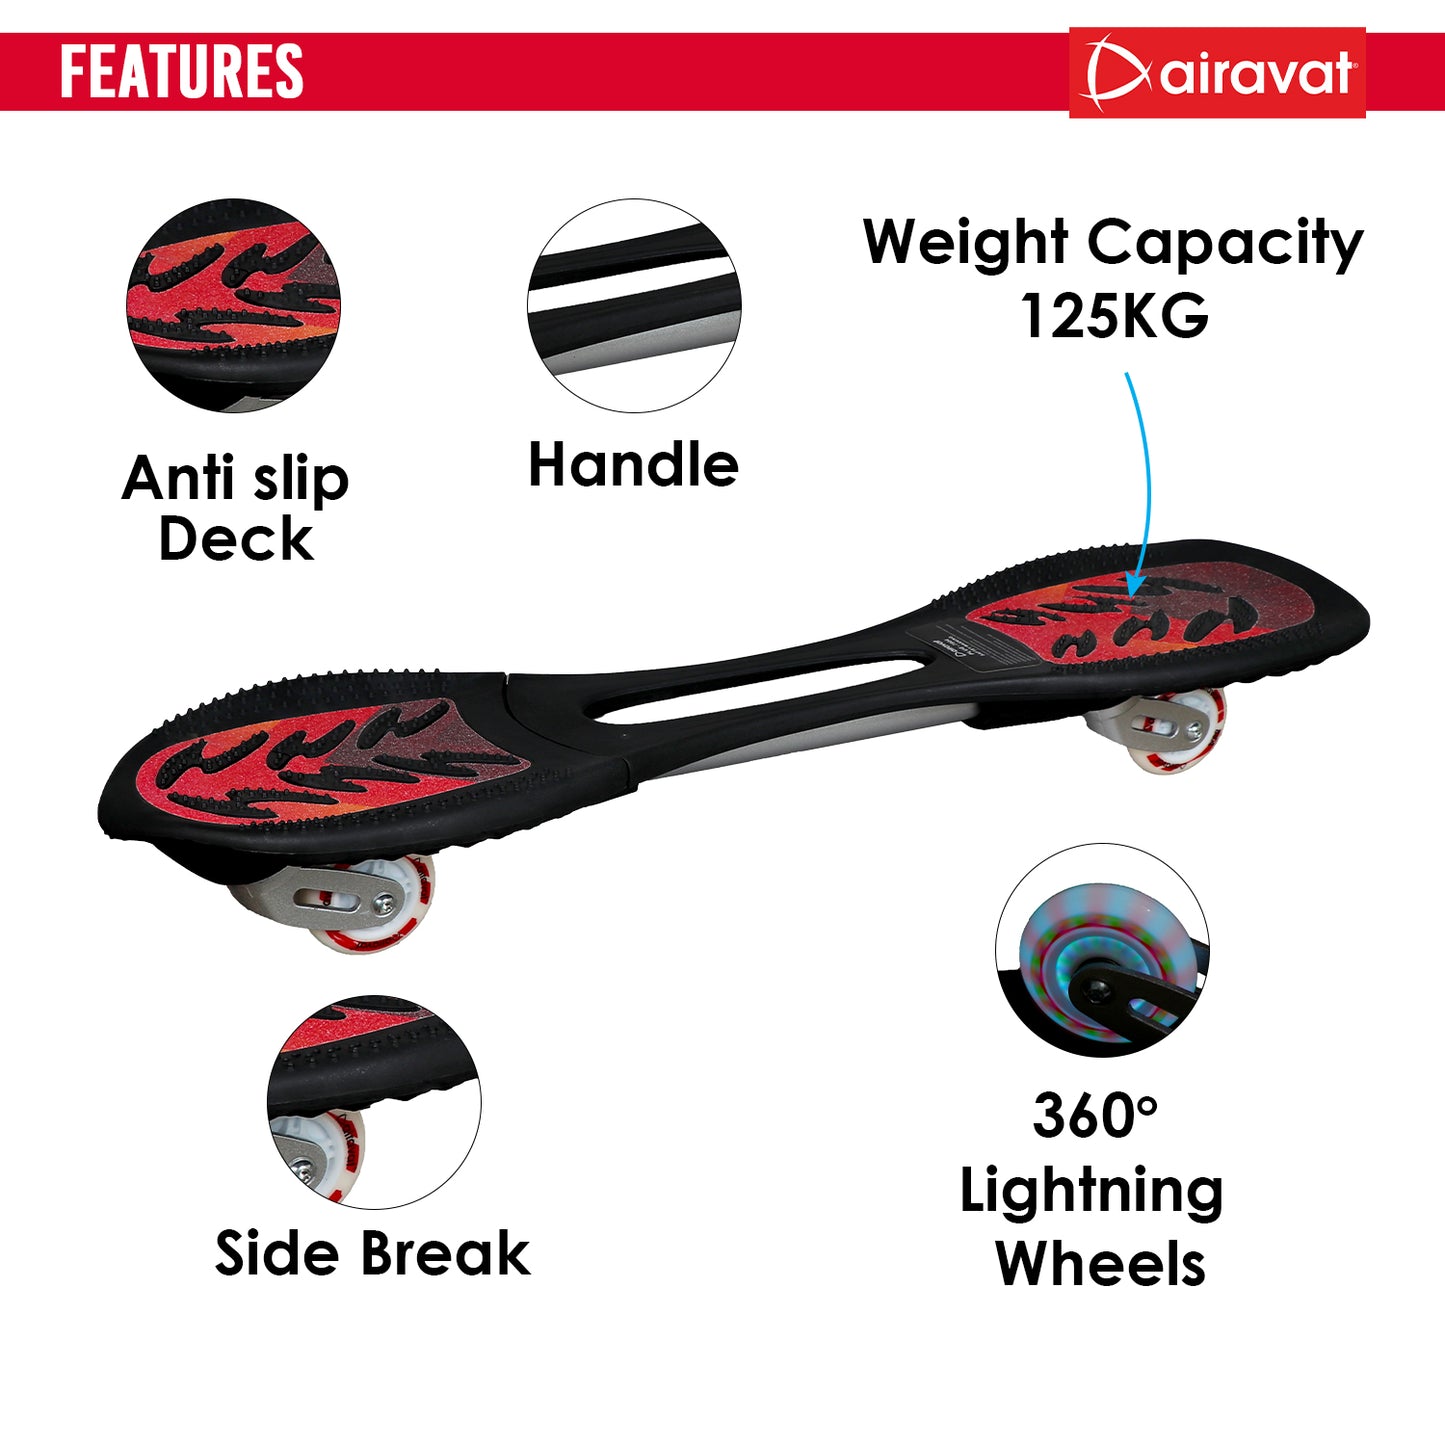 7804-waveboard-features-red